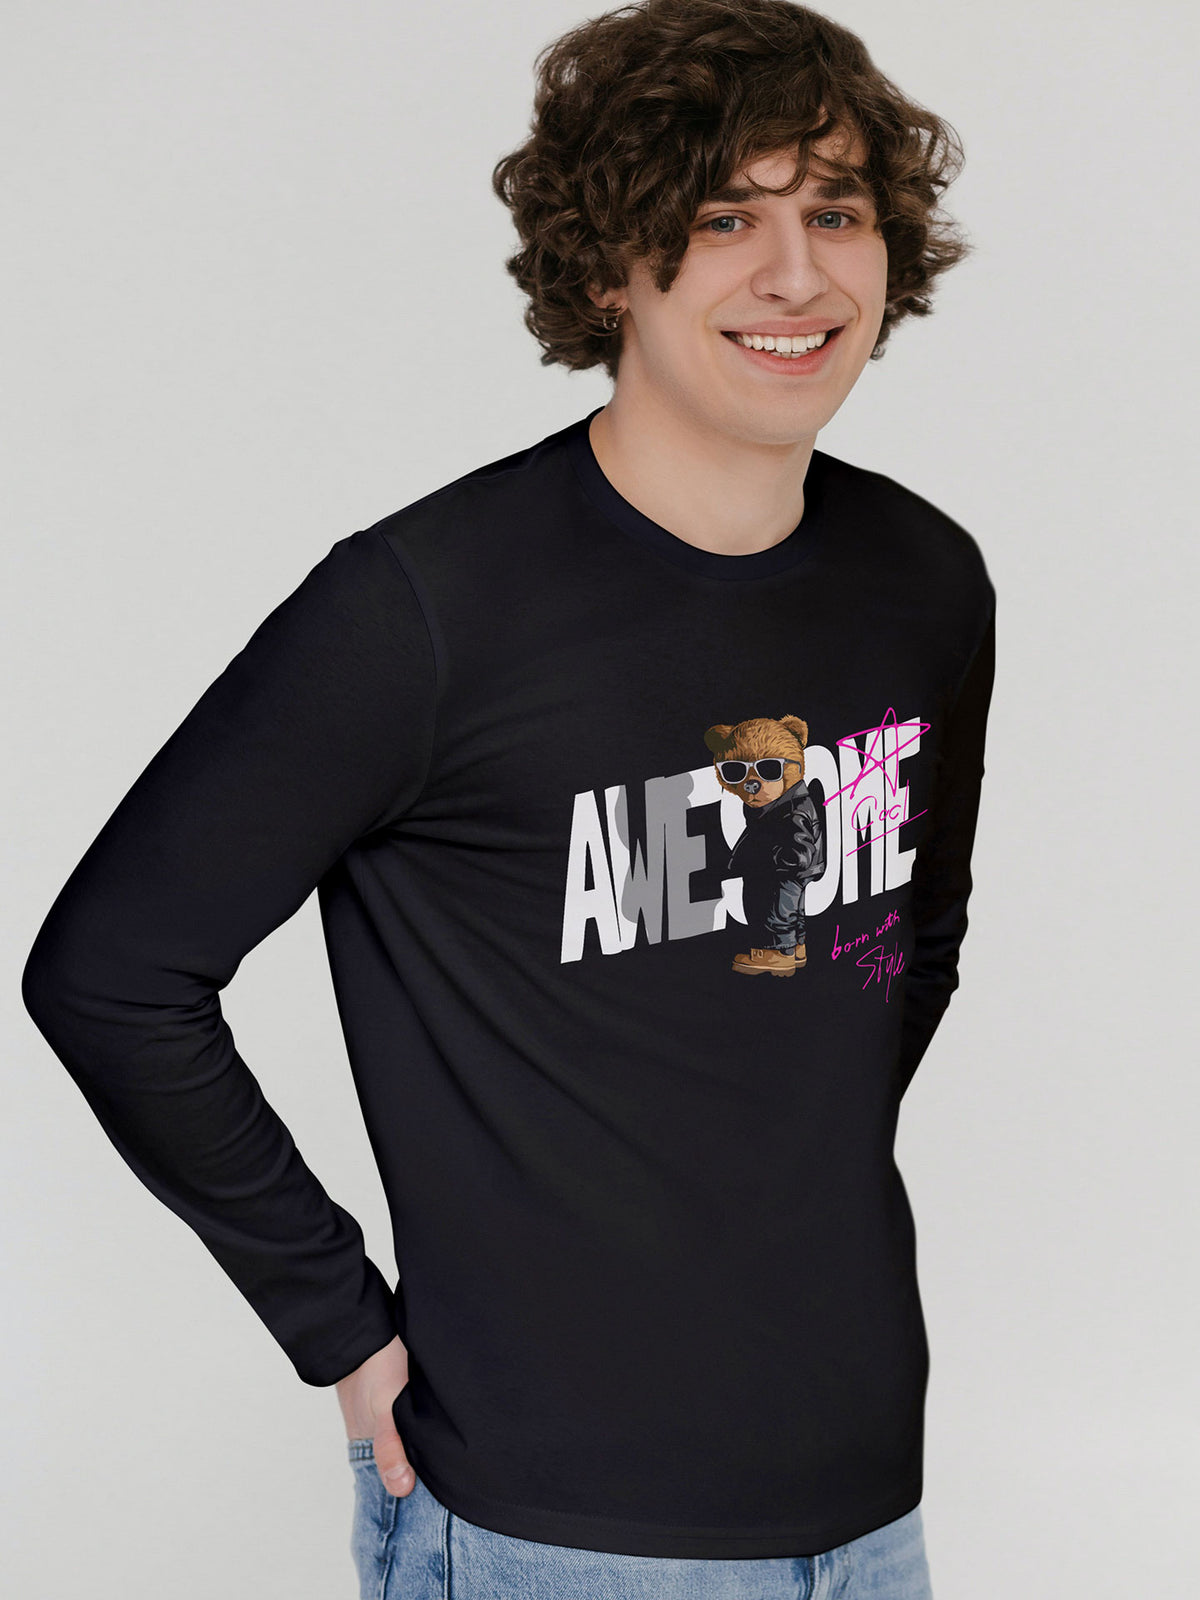 Men's Black Awesome Printed Full-Sleeve T-shirt